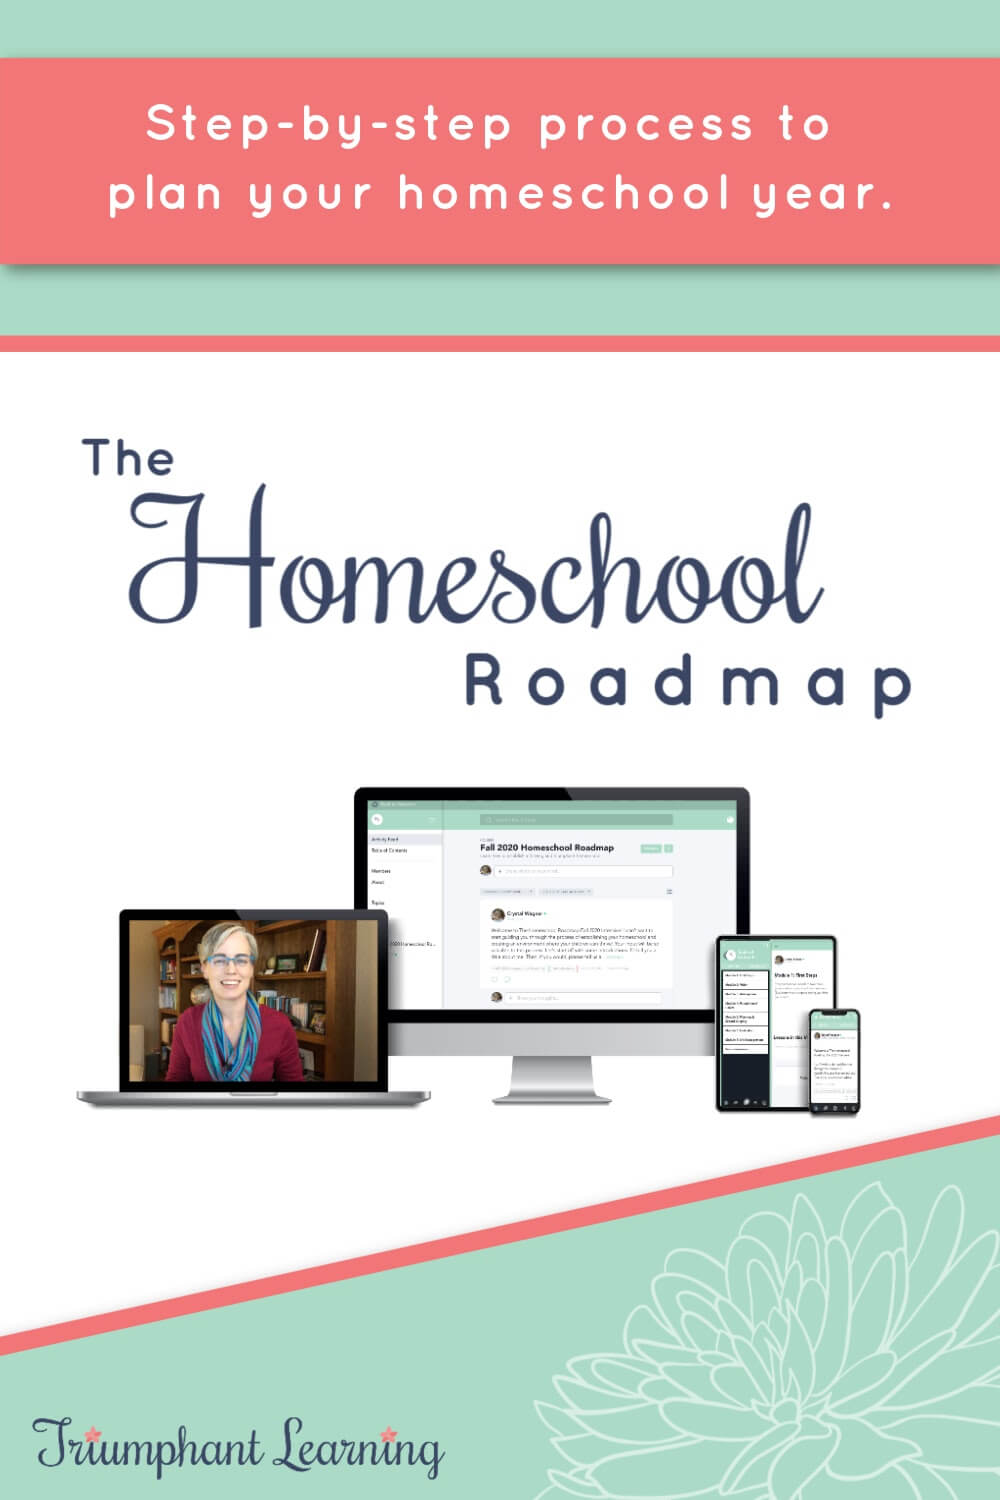 The Homeschool Roadmap is your step-by-step guide to start homeschooling, lay a solid foundation, and manage your homeschool days. via @TriLearning